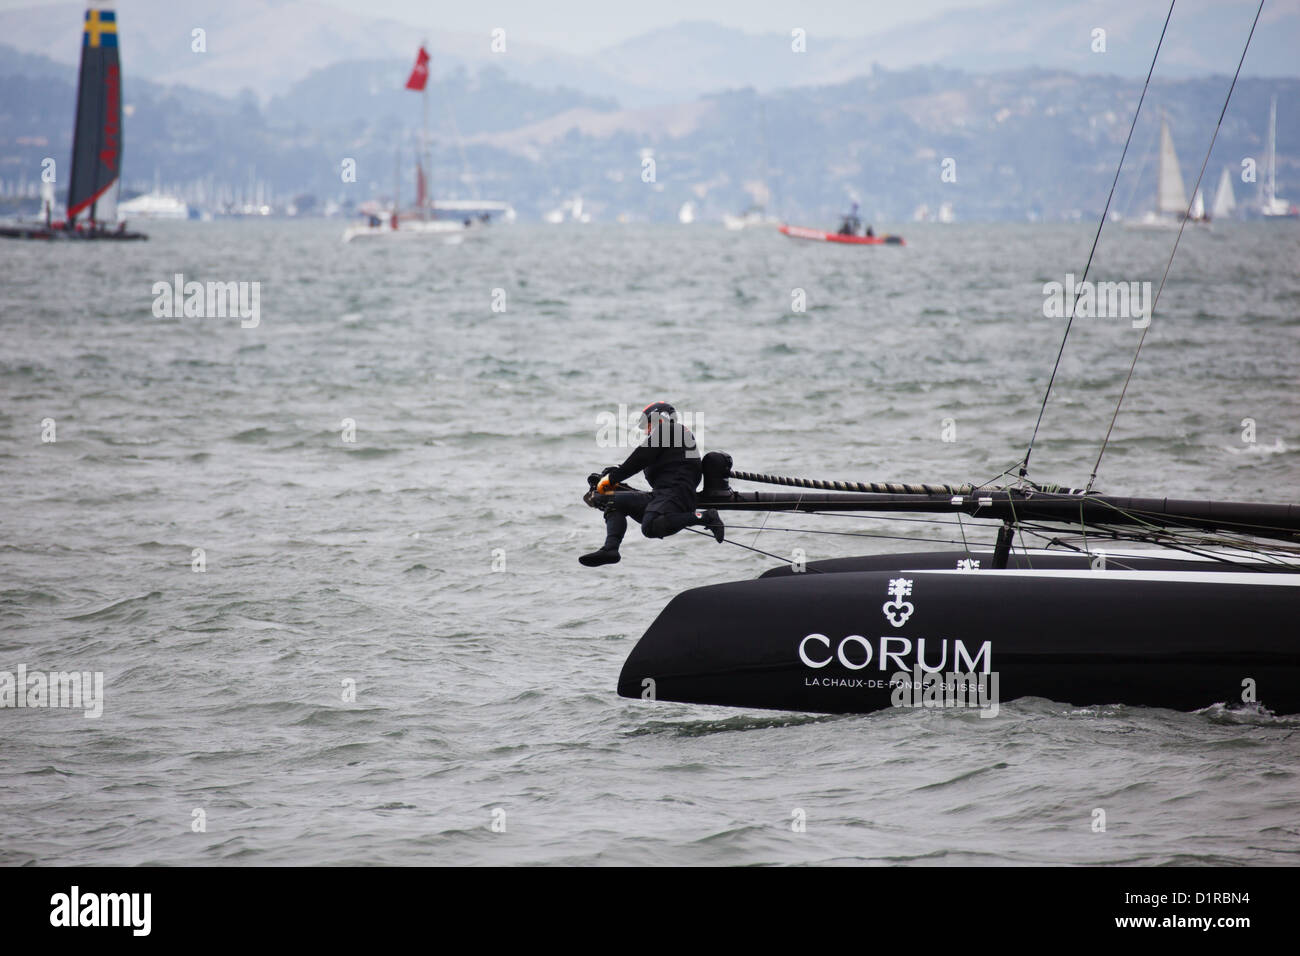 One French Team Corum member, makes adjustments during Louis Vuitton Cup race in Americas Cup Series in San Francisco, CA, USA Stock Photo